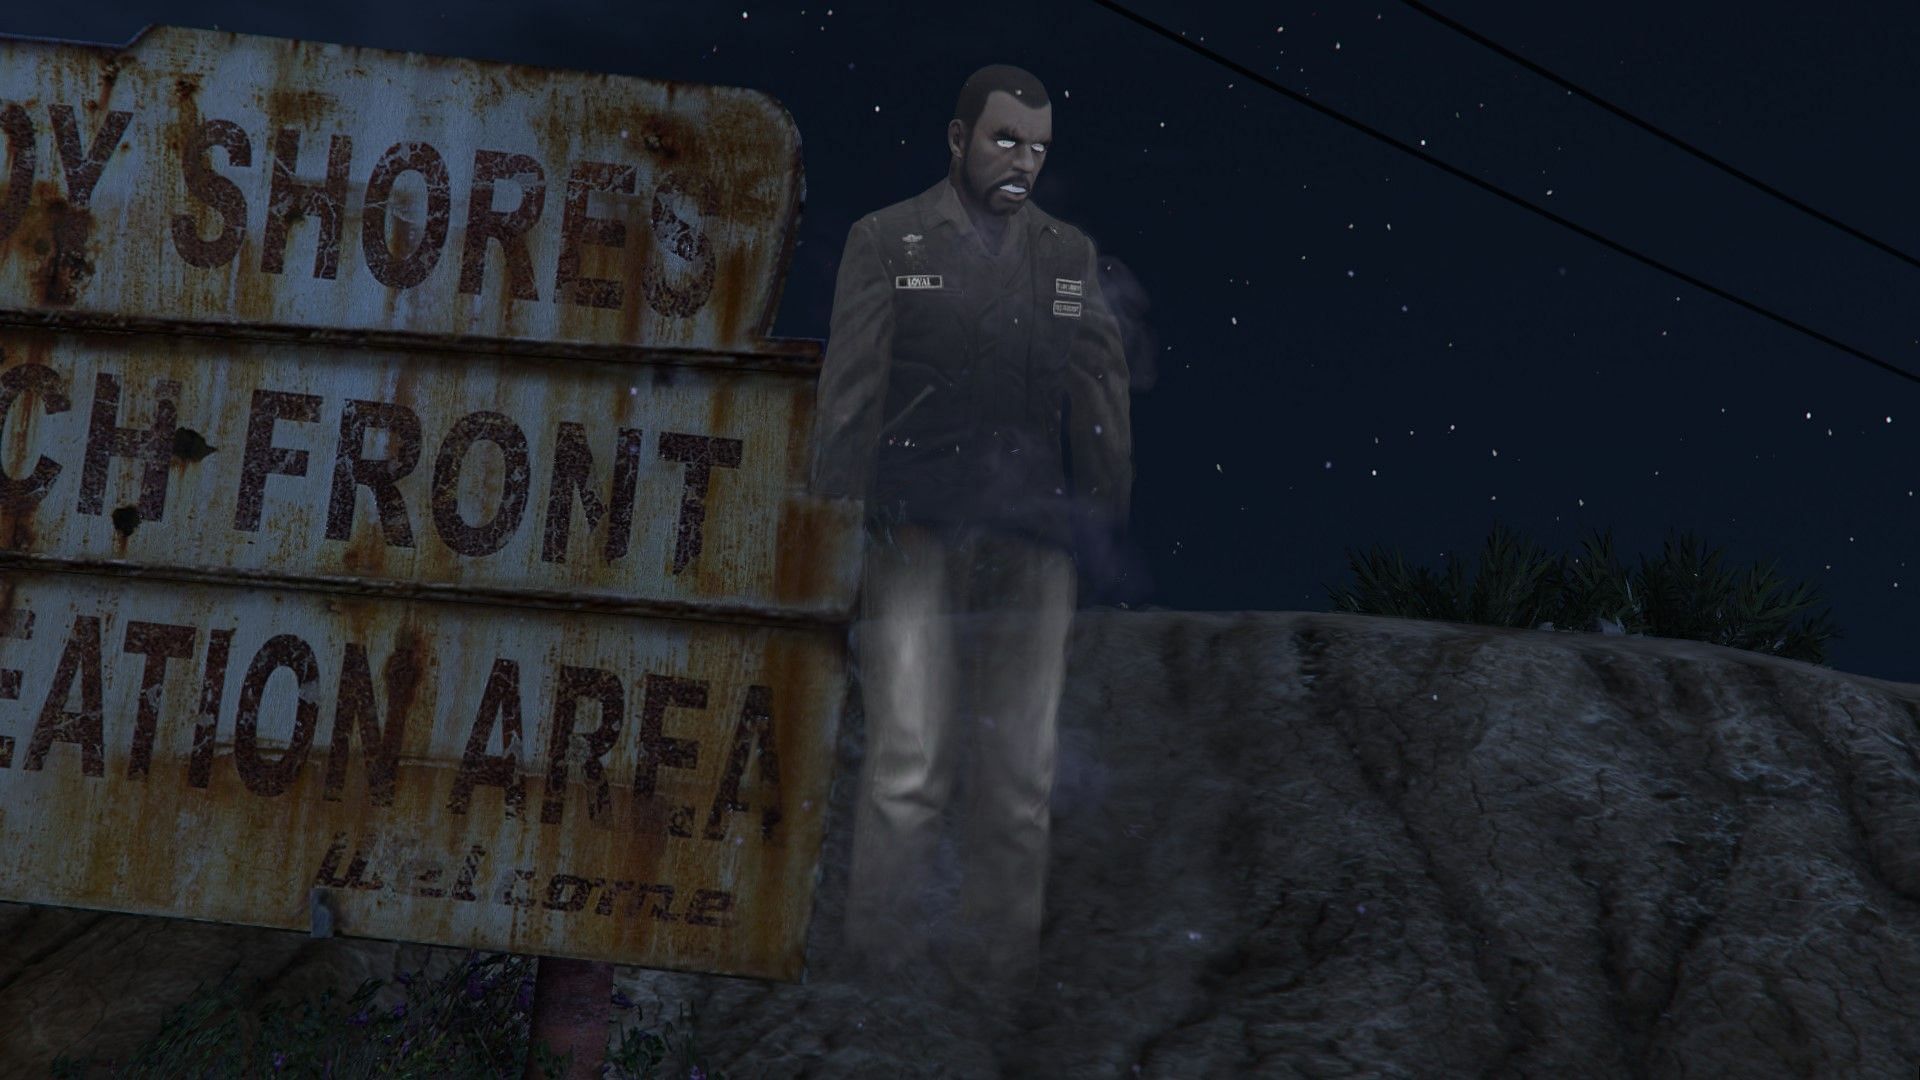 He appears in the same spot where he died in Grand Theft Auto 5 (Image via GTA Wiki)